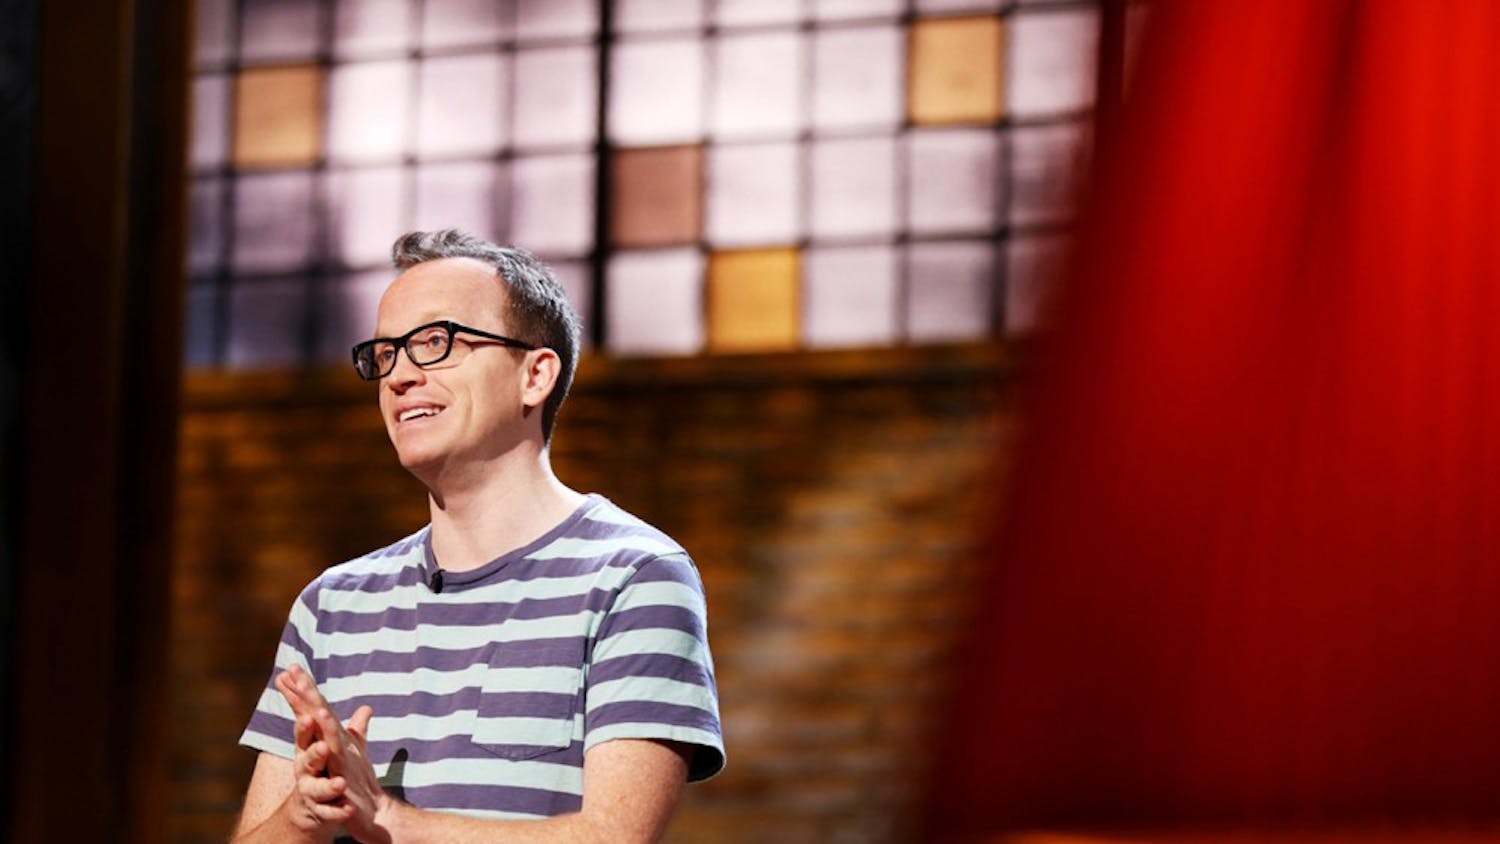 Chris Gethard brings his one-man off-Broadway show "Career Suicide" to HBO on May 6. 